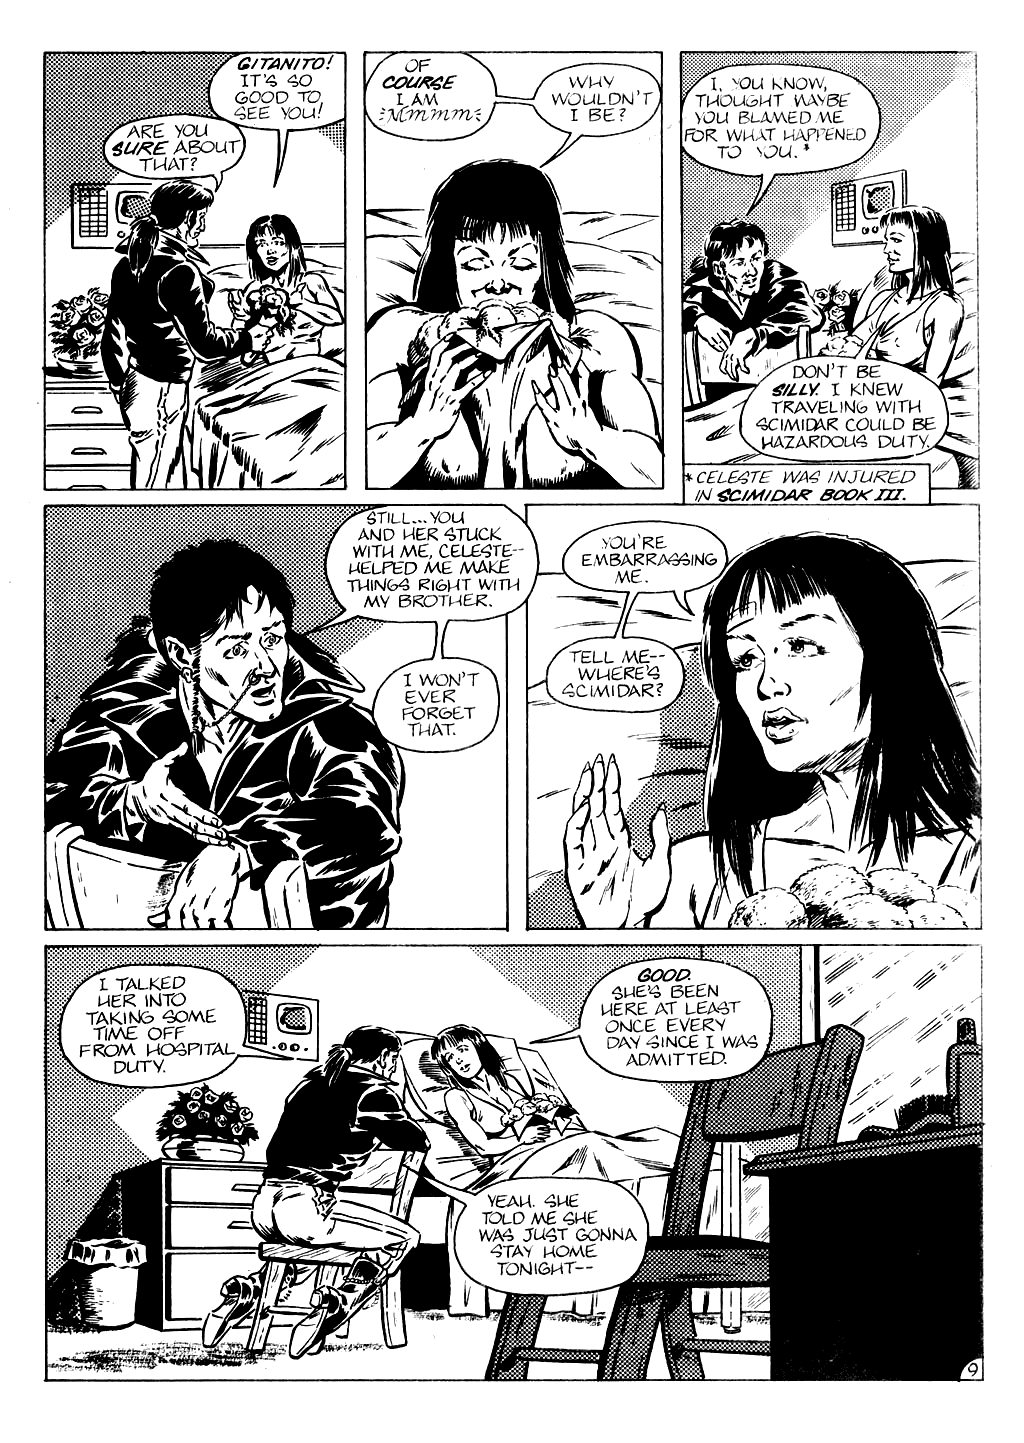 Scimidar Book IV: Wild Thing issue 1 - Page 10